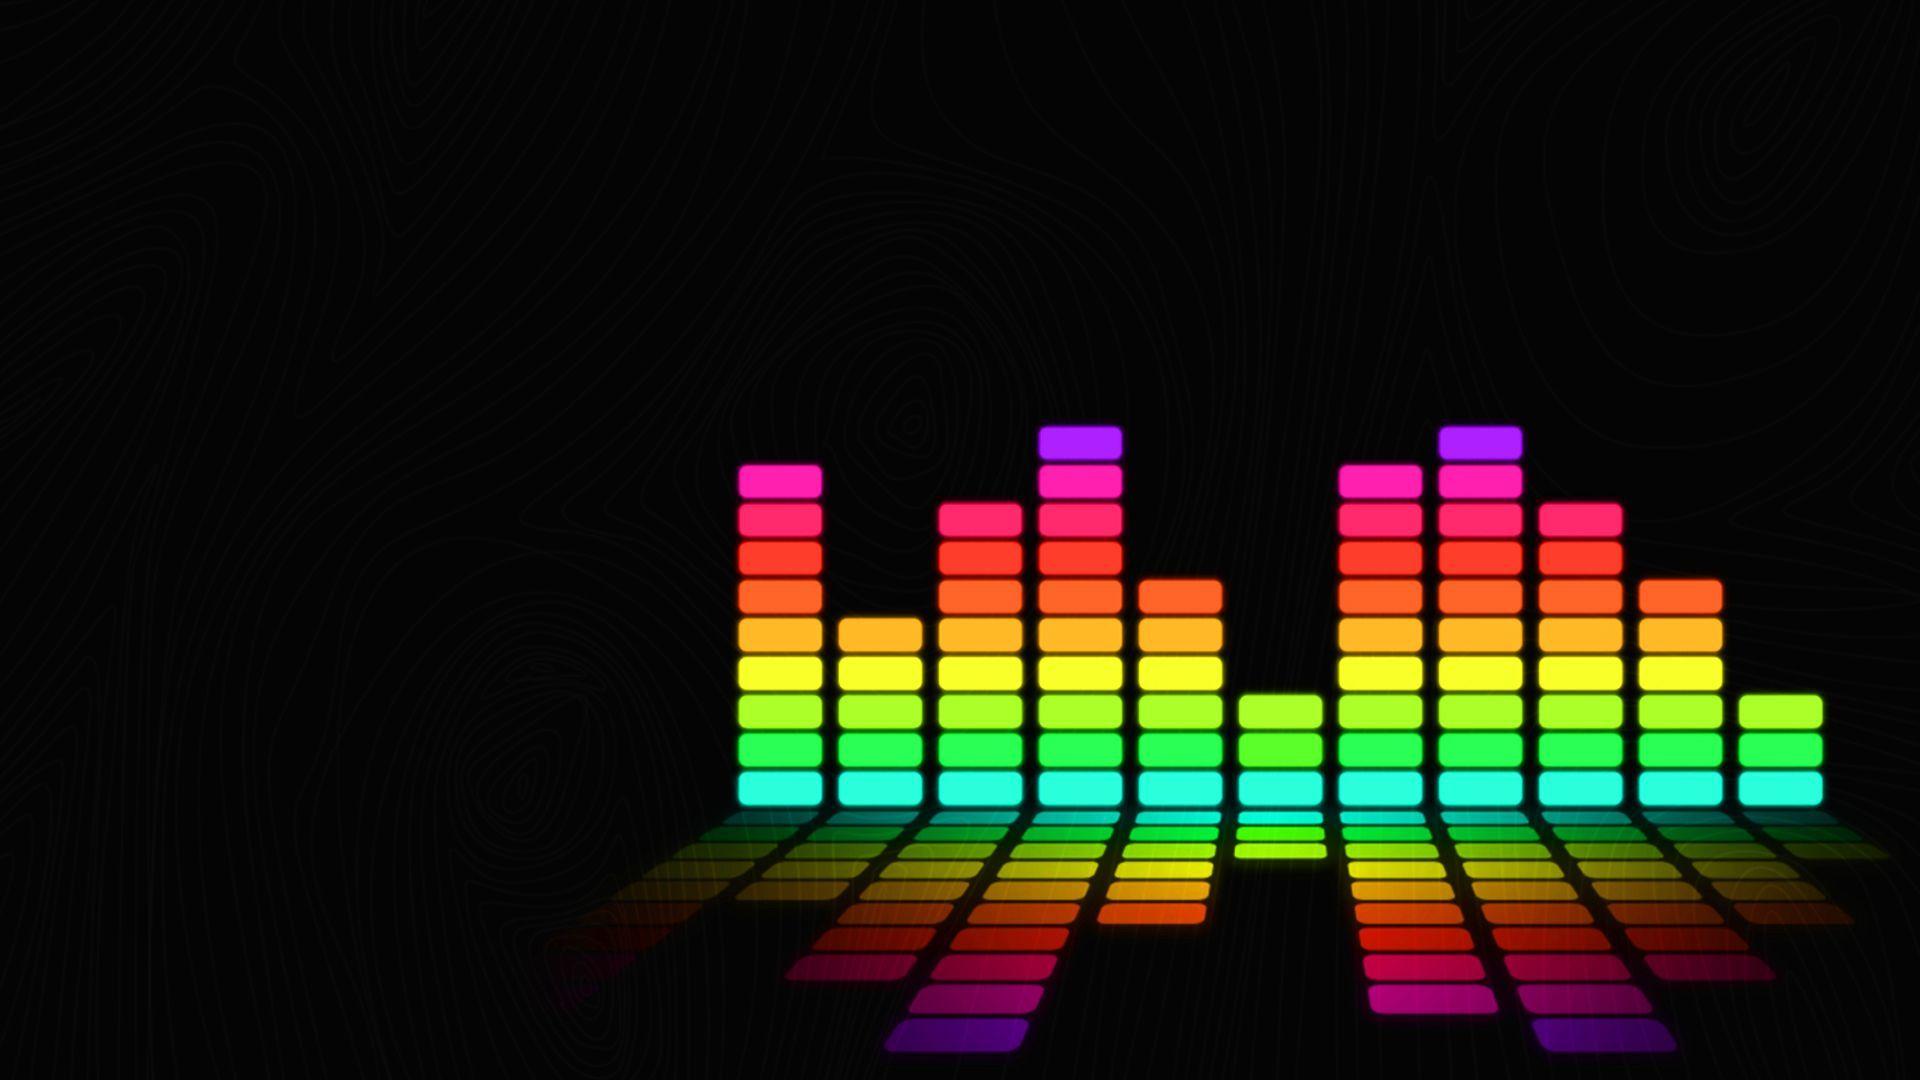 xpx Awesome Music Browser Themes Desktop Pic. wallpaper